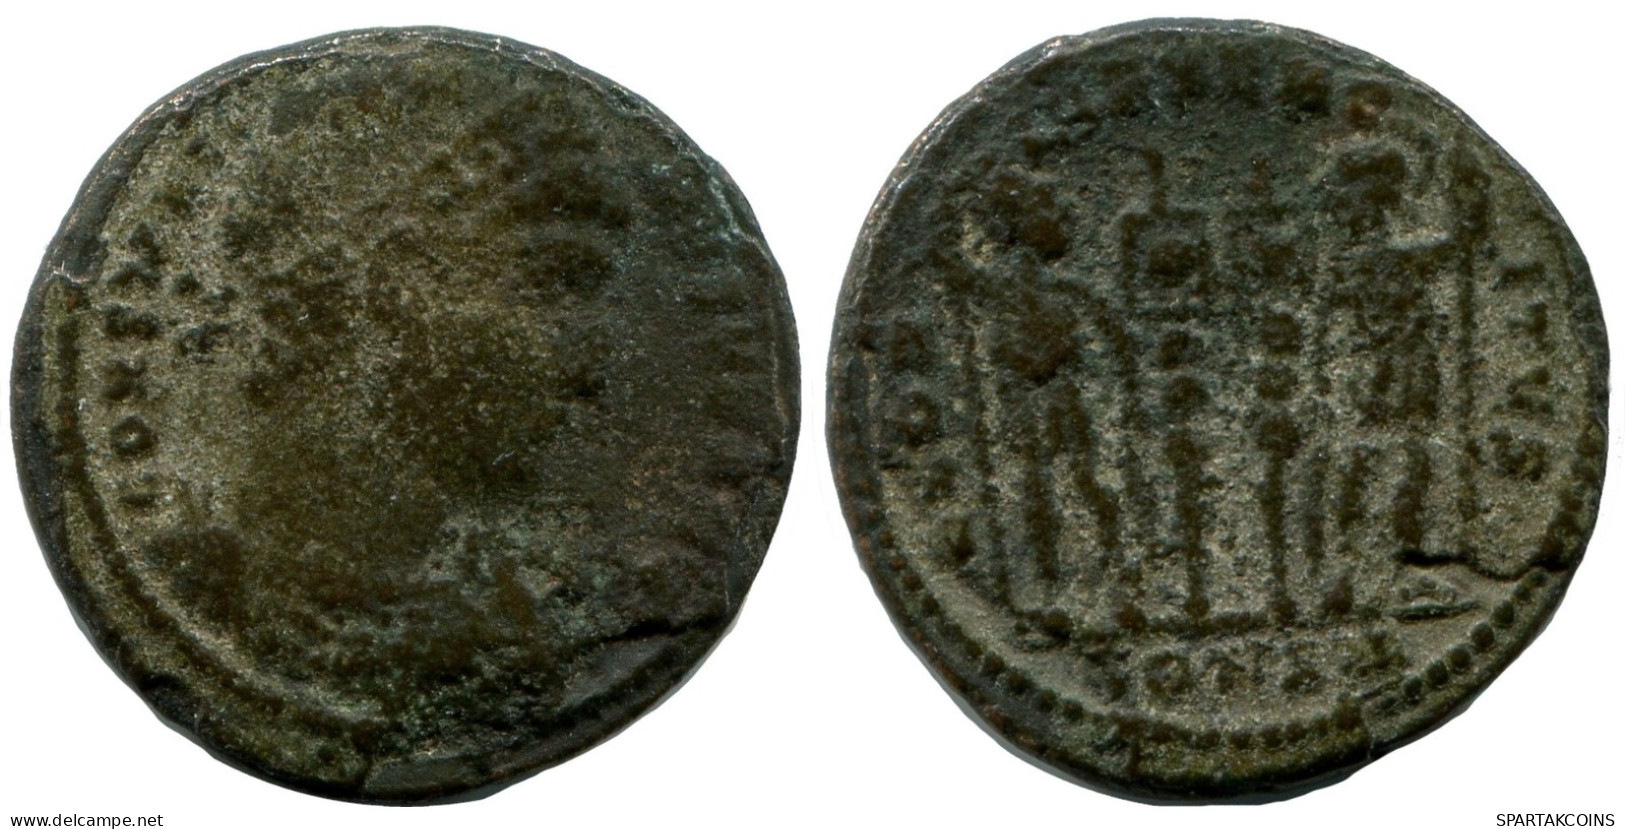 CONSTANTINE I CONSTANTINOPLE FROM THE ROYAL ONTARIO MUSEUM #ANC10776.14.D.A - L'Empire Chrétien (307 à 363)